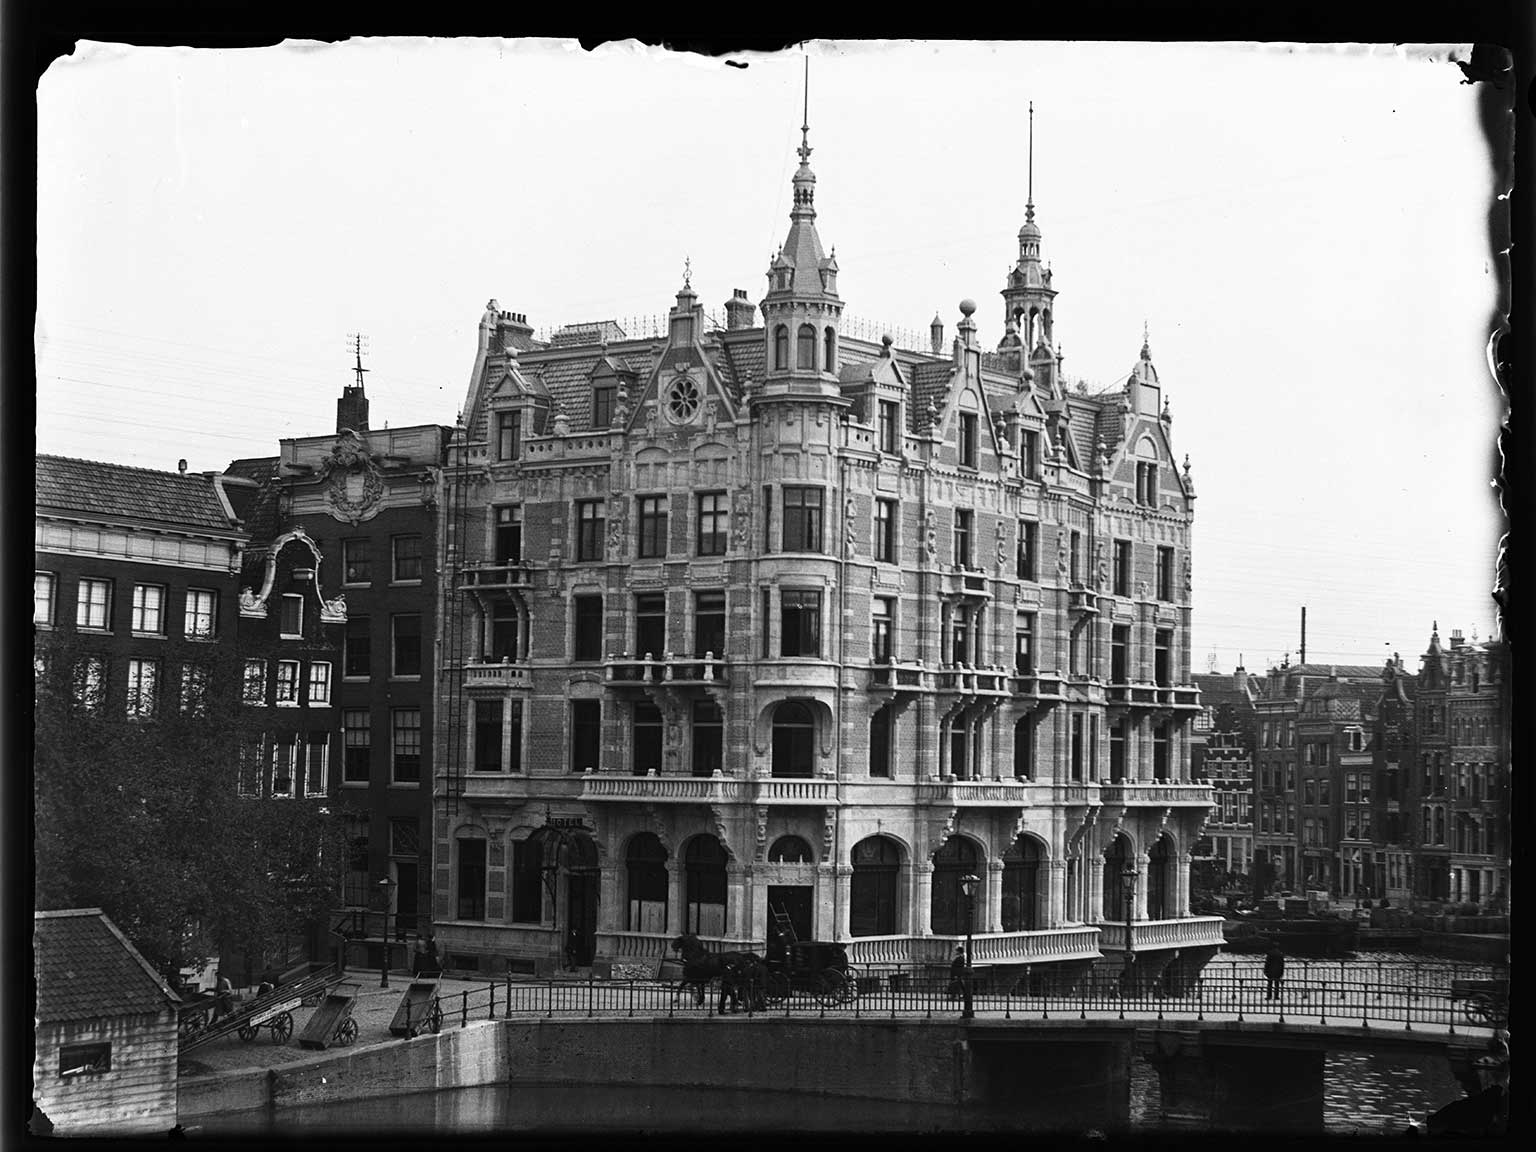 Hotel de l'Europe, Amsterdam, shortly after construction in 1896, photo by Jacob Olie